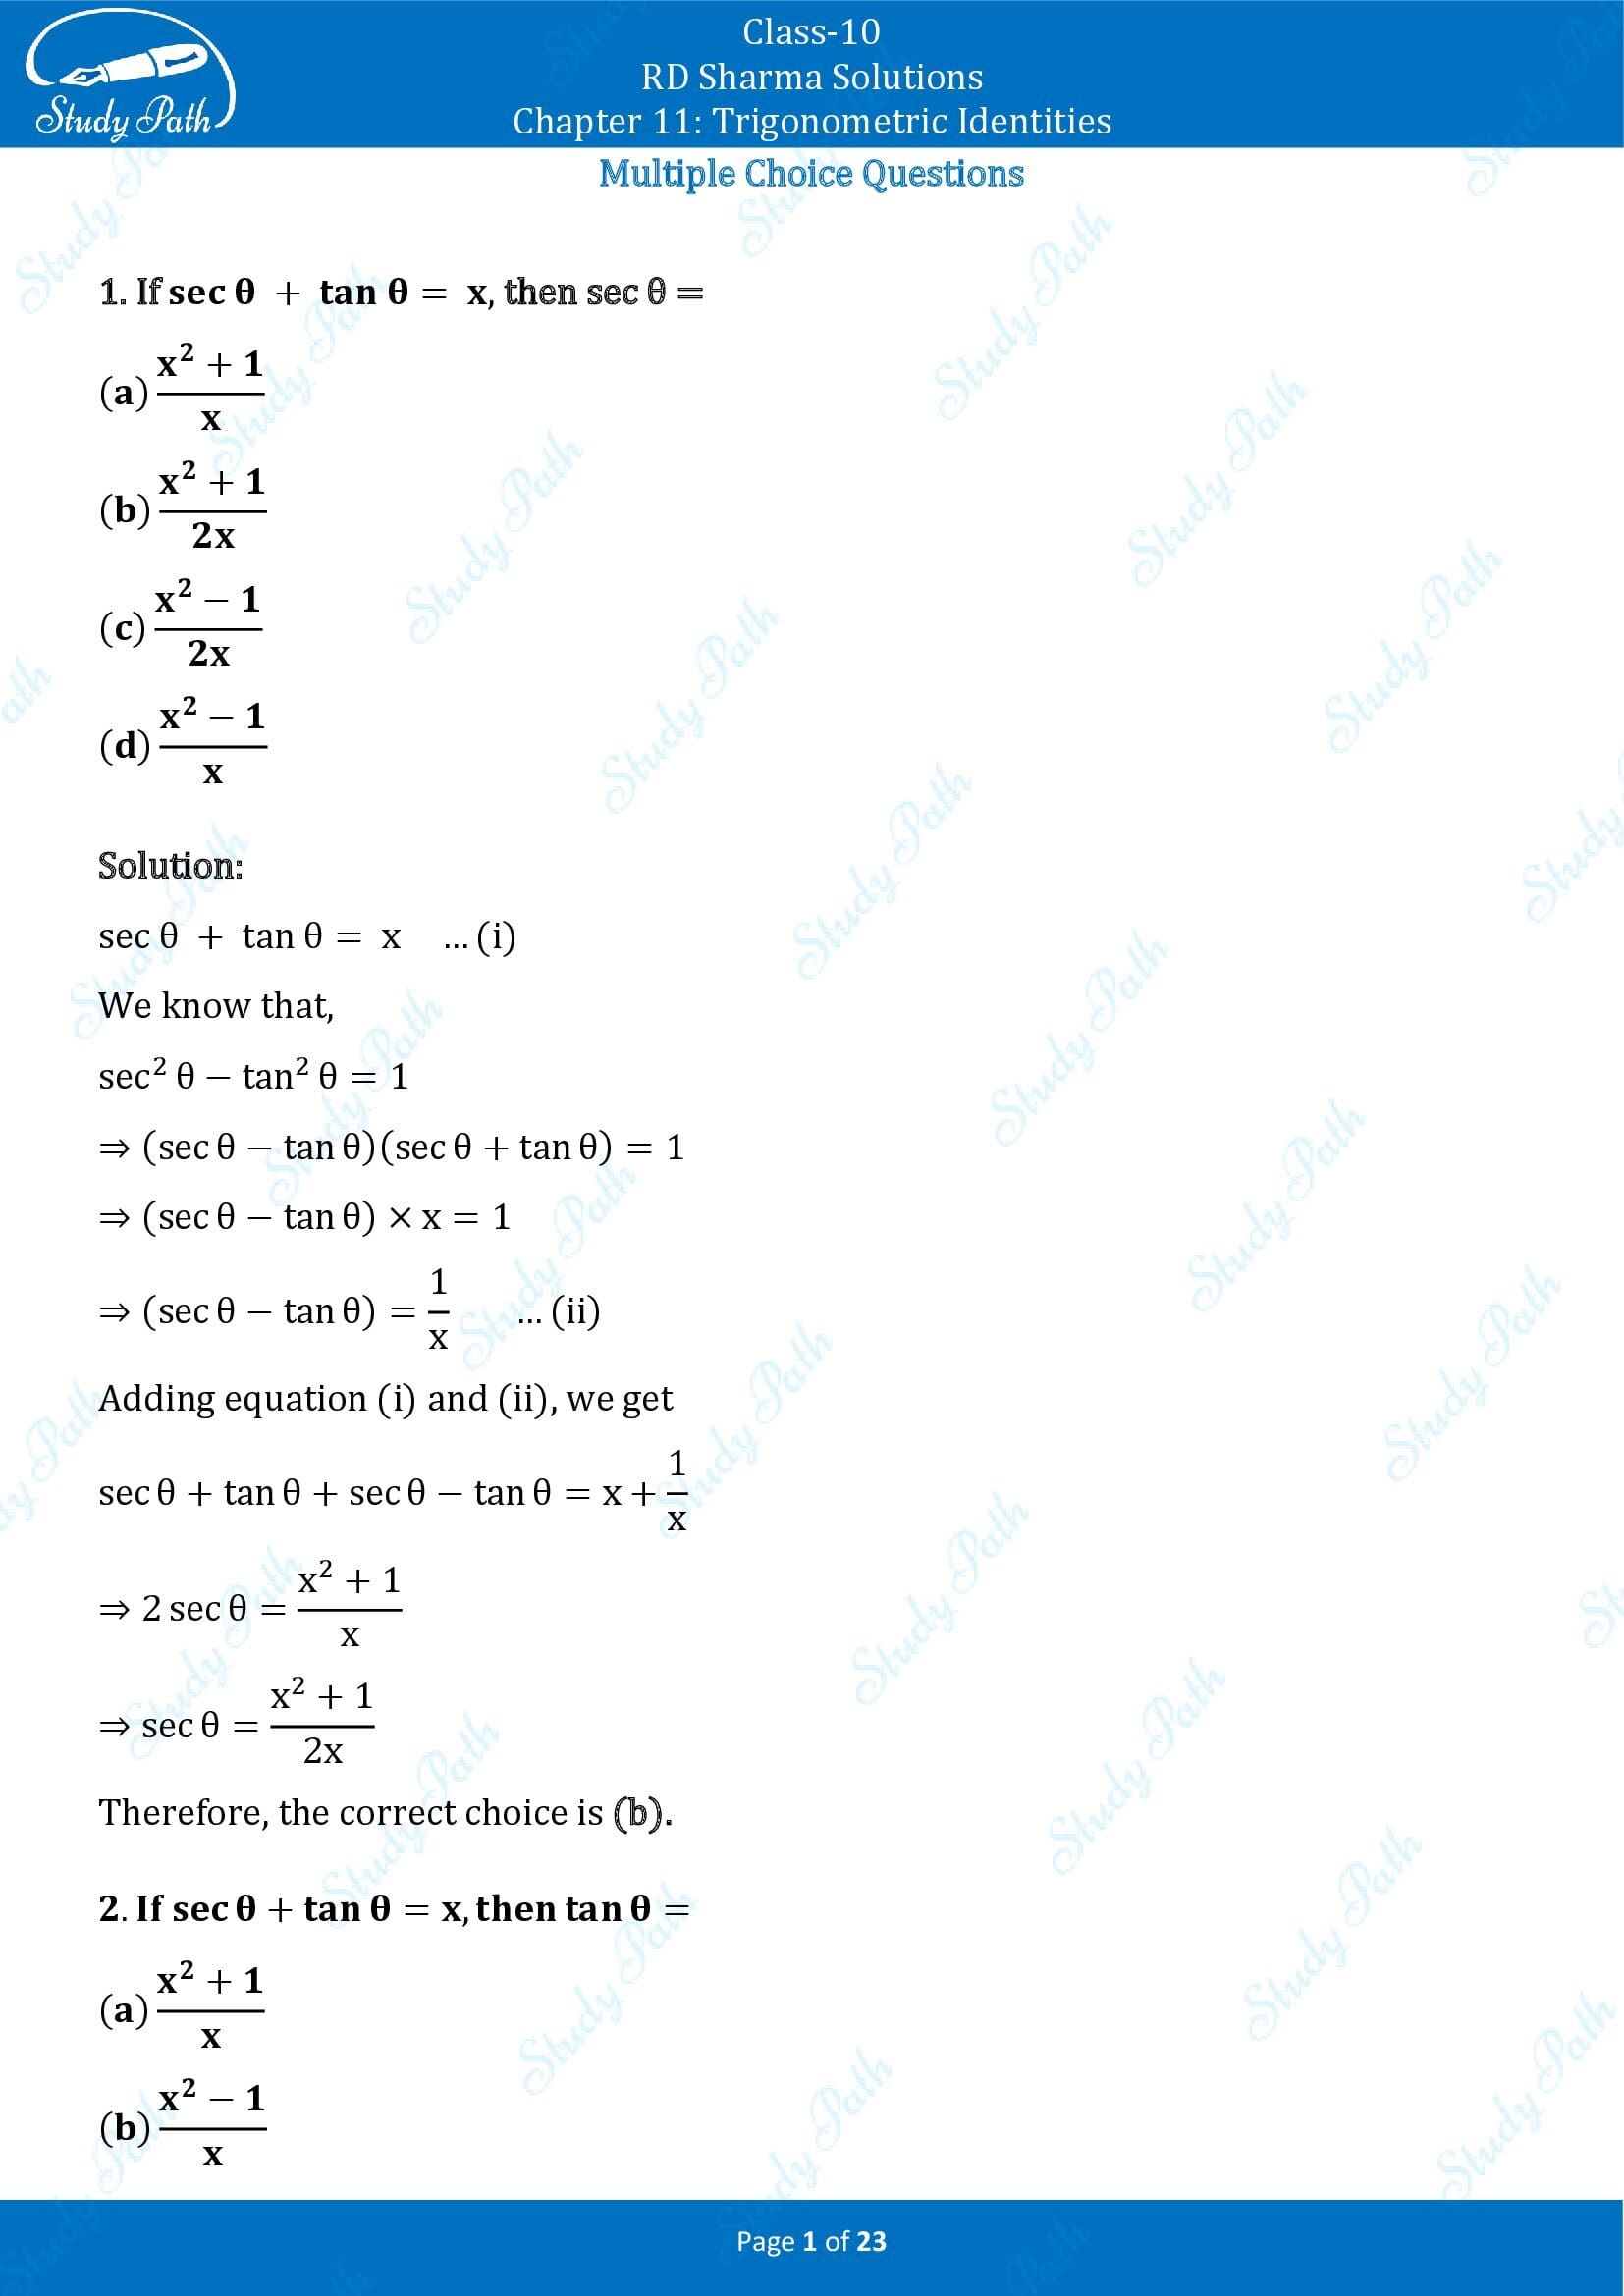 RD Sharma Solutions Class 10 Chapter 11 Trigonometric Identities Multiple Choice Questions MCQs 00001